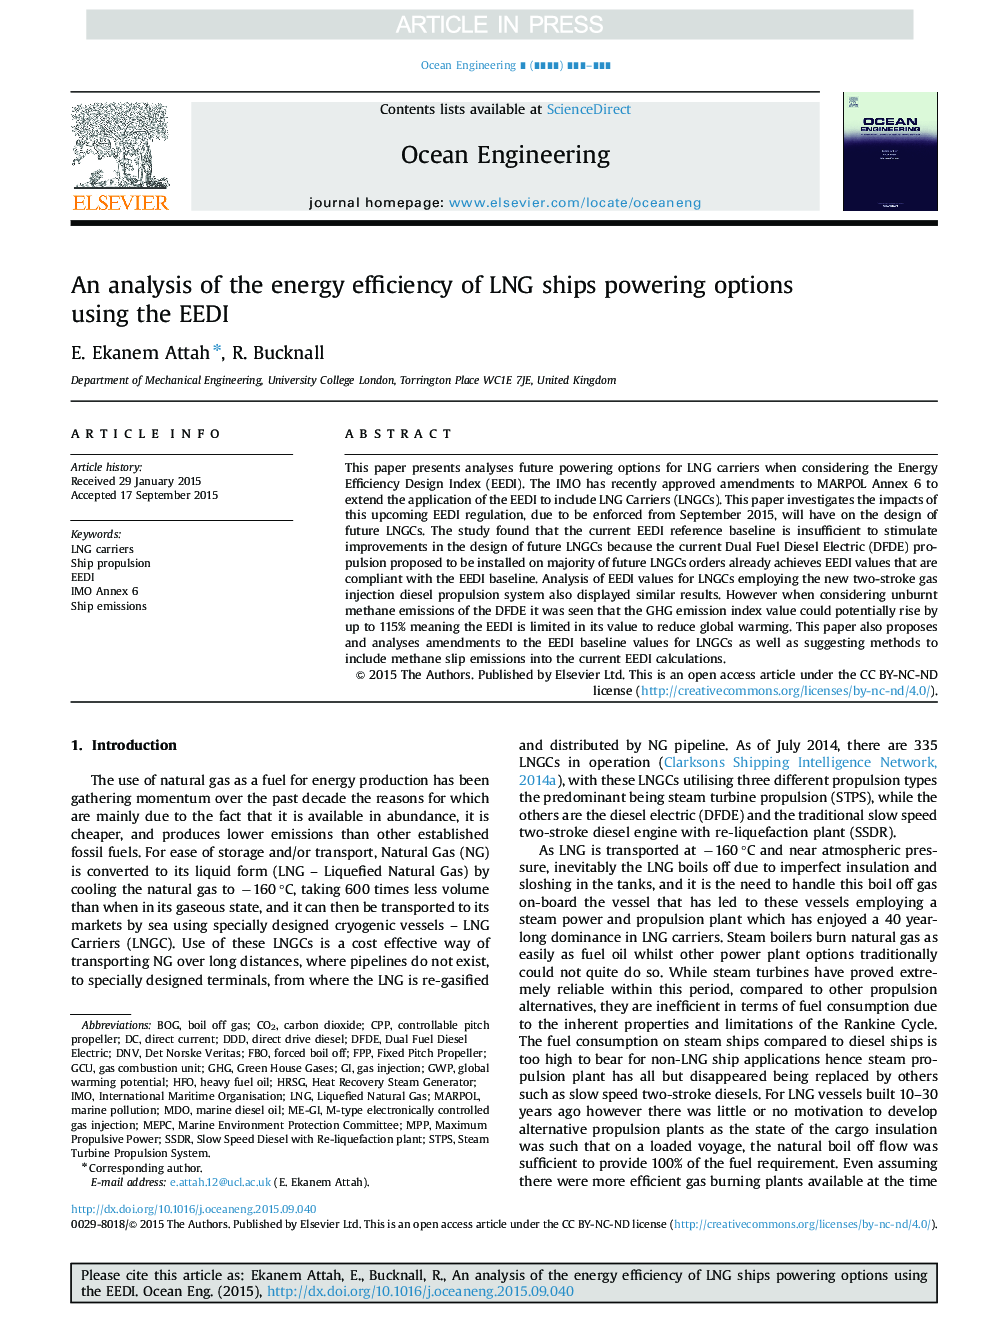 An analysis of the energy efficiency of LNG ships powering options using the EEDI